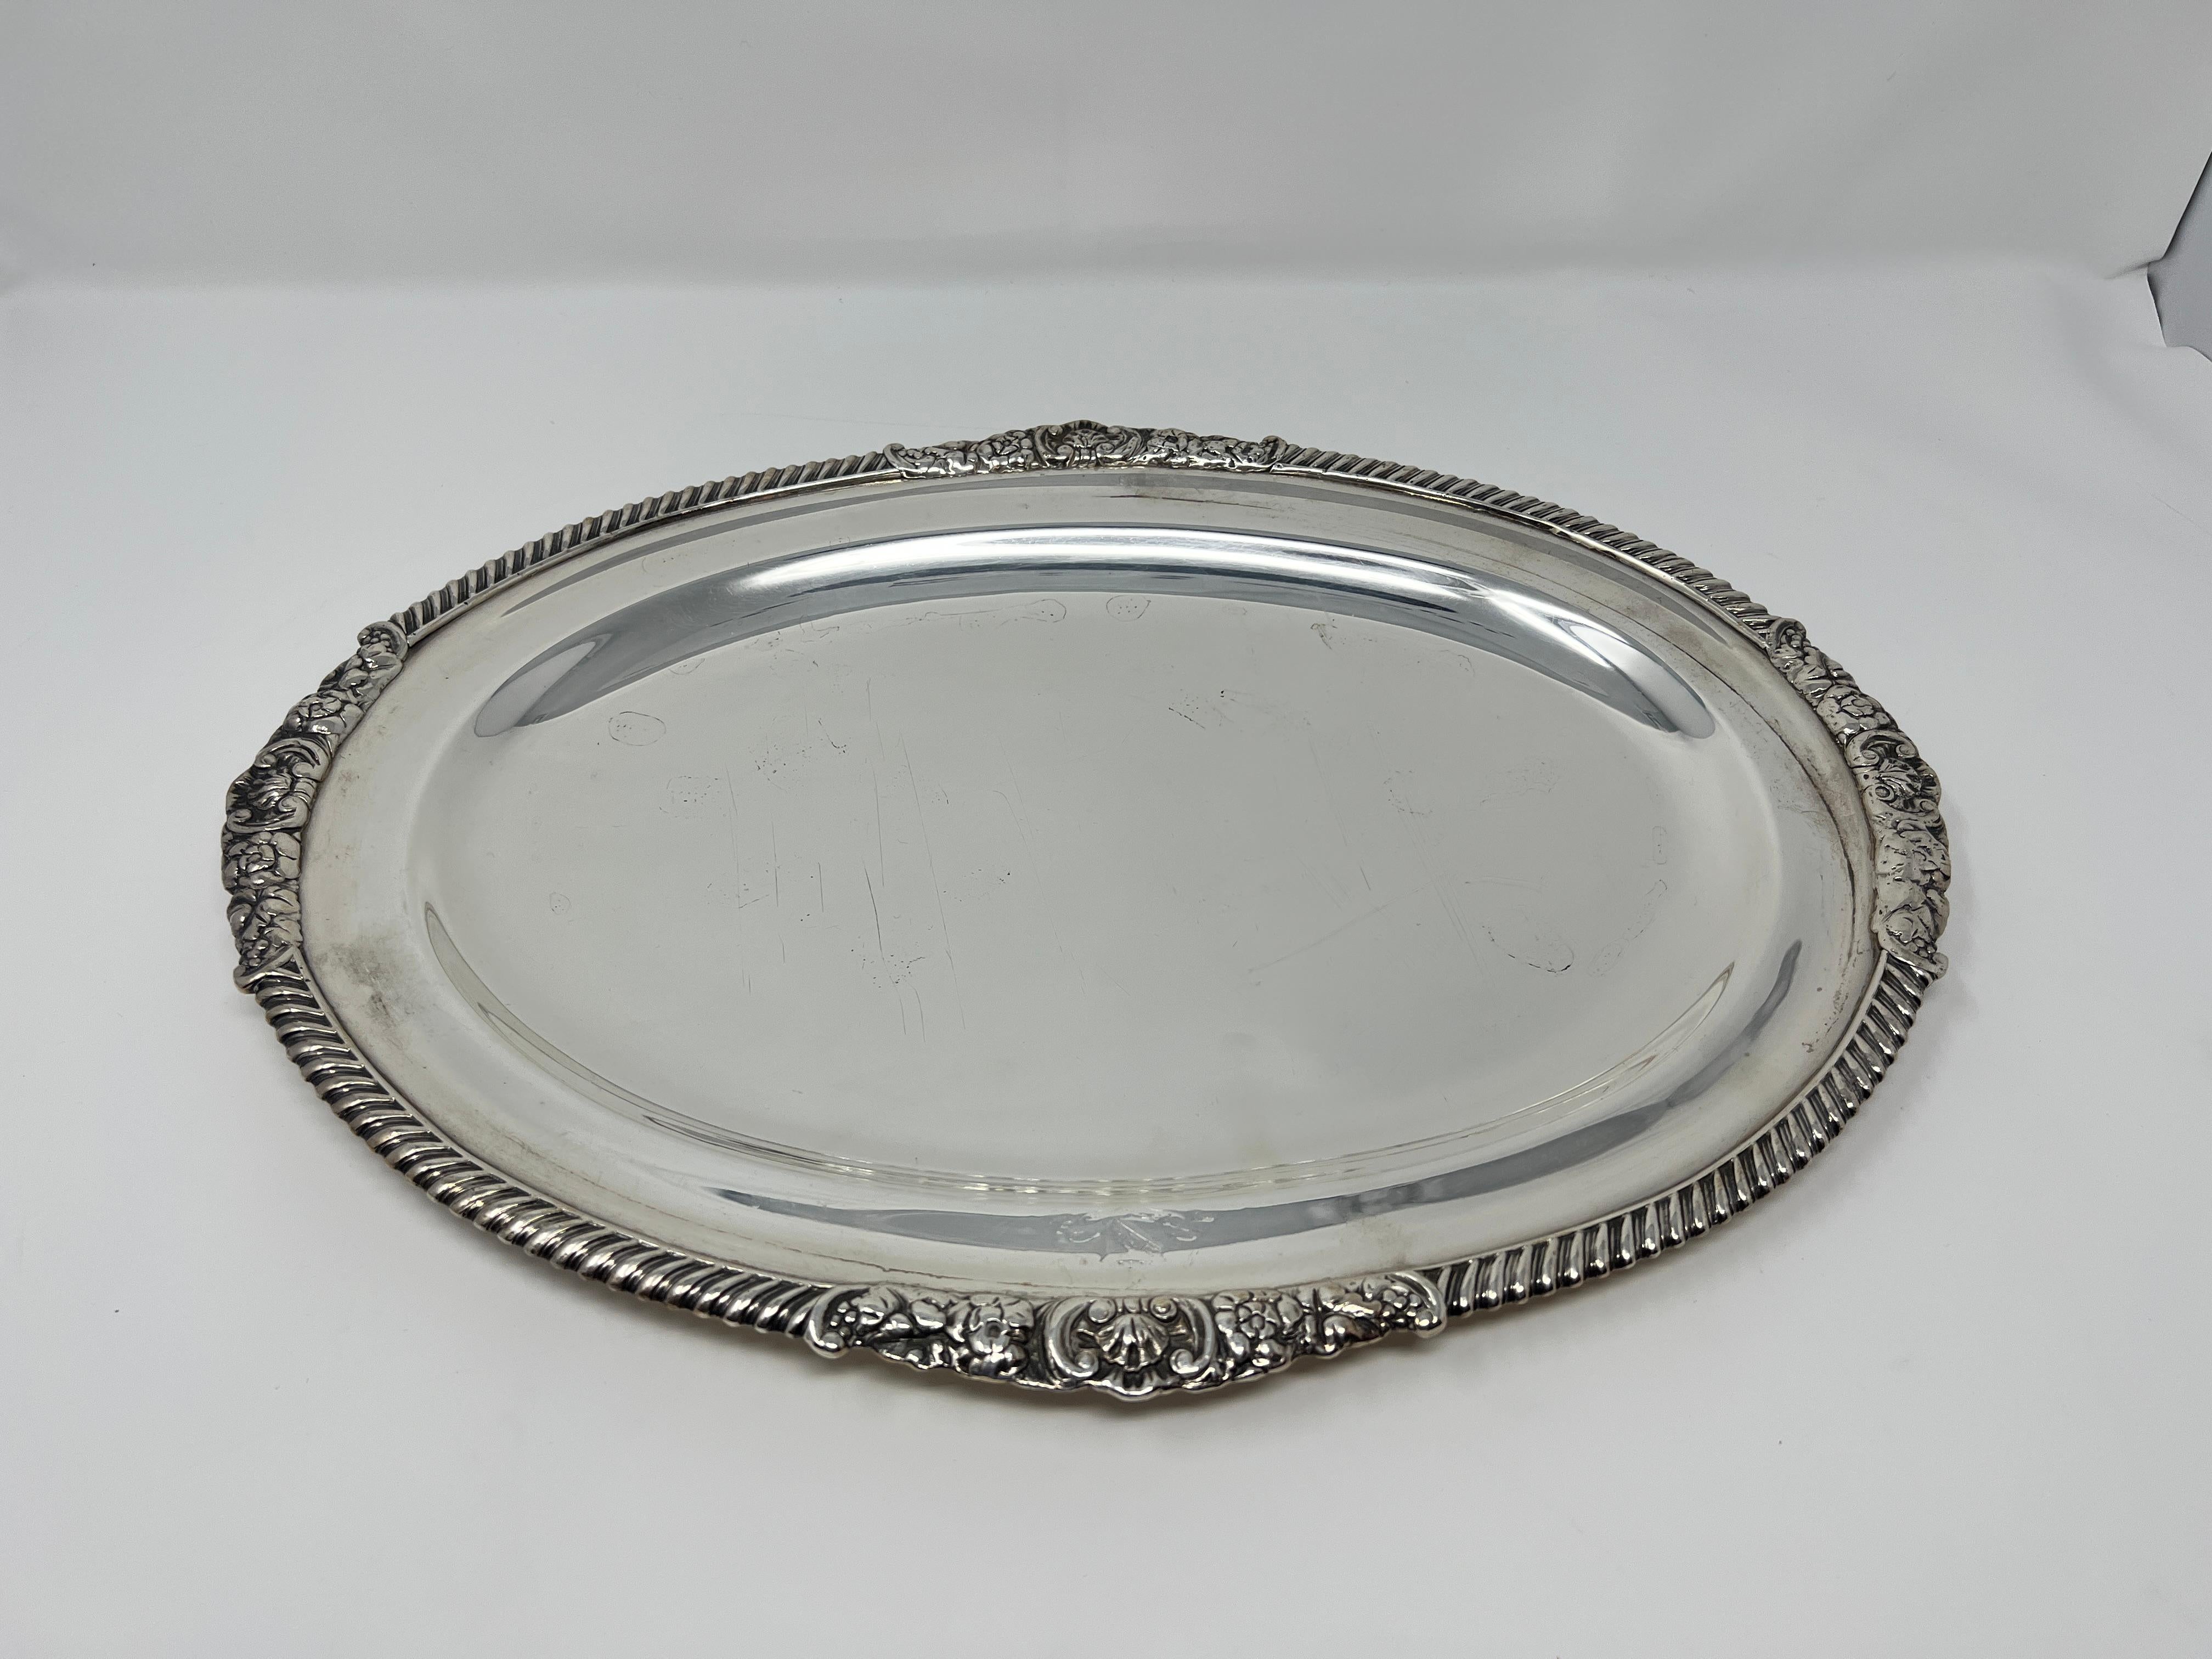 Sheffield Plate Antique English Handsome Sheffield Covered Dish 1870-90 For Sale